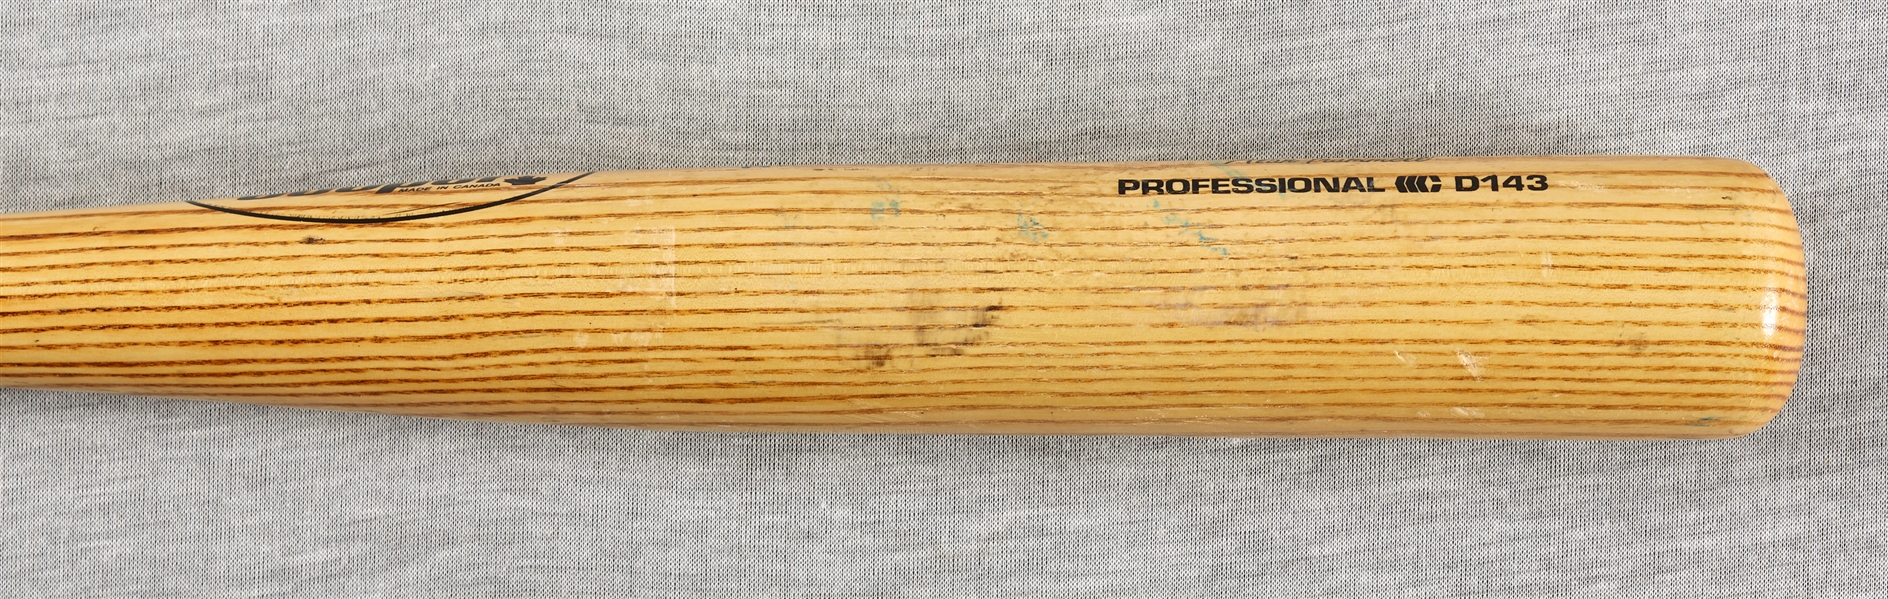 Alan Trammell Game-Used & Signed Cooper Bat (BAS)